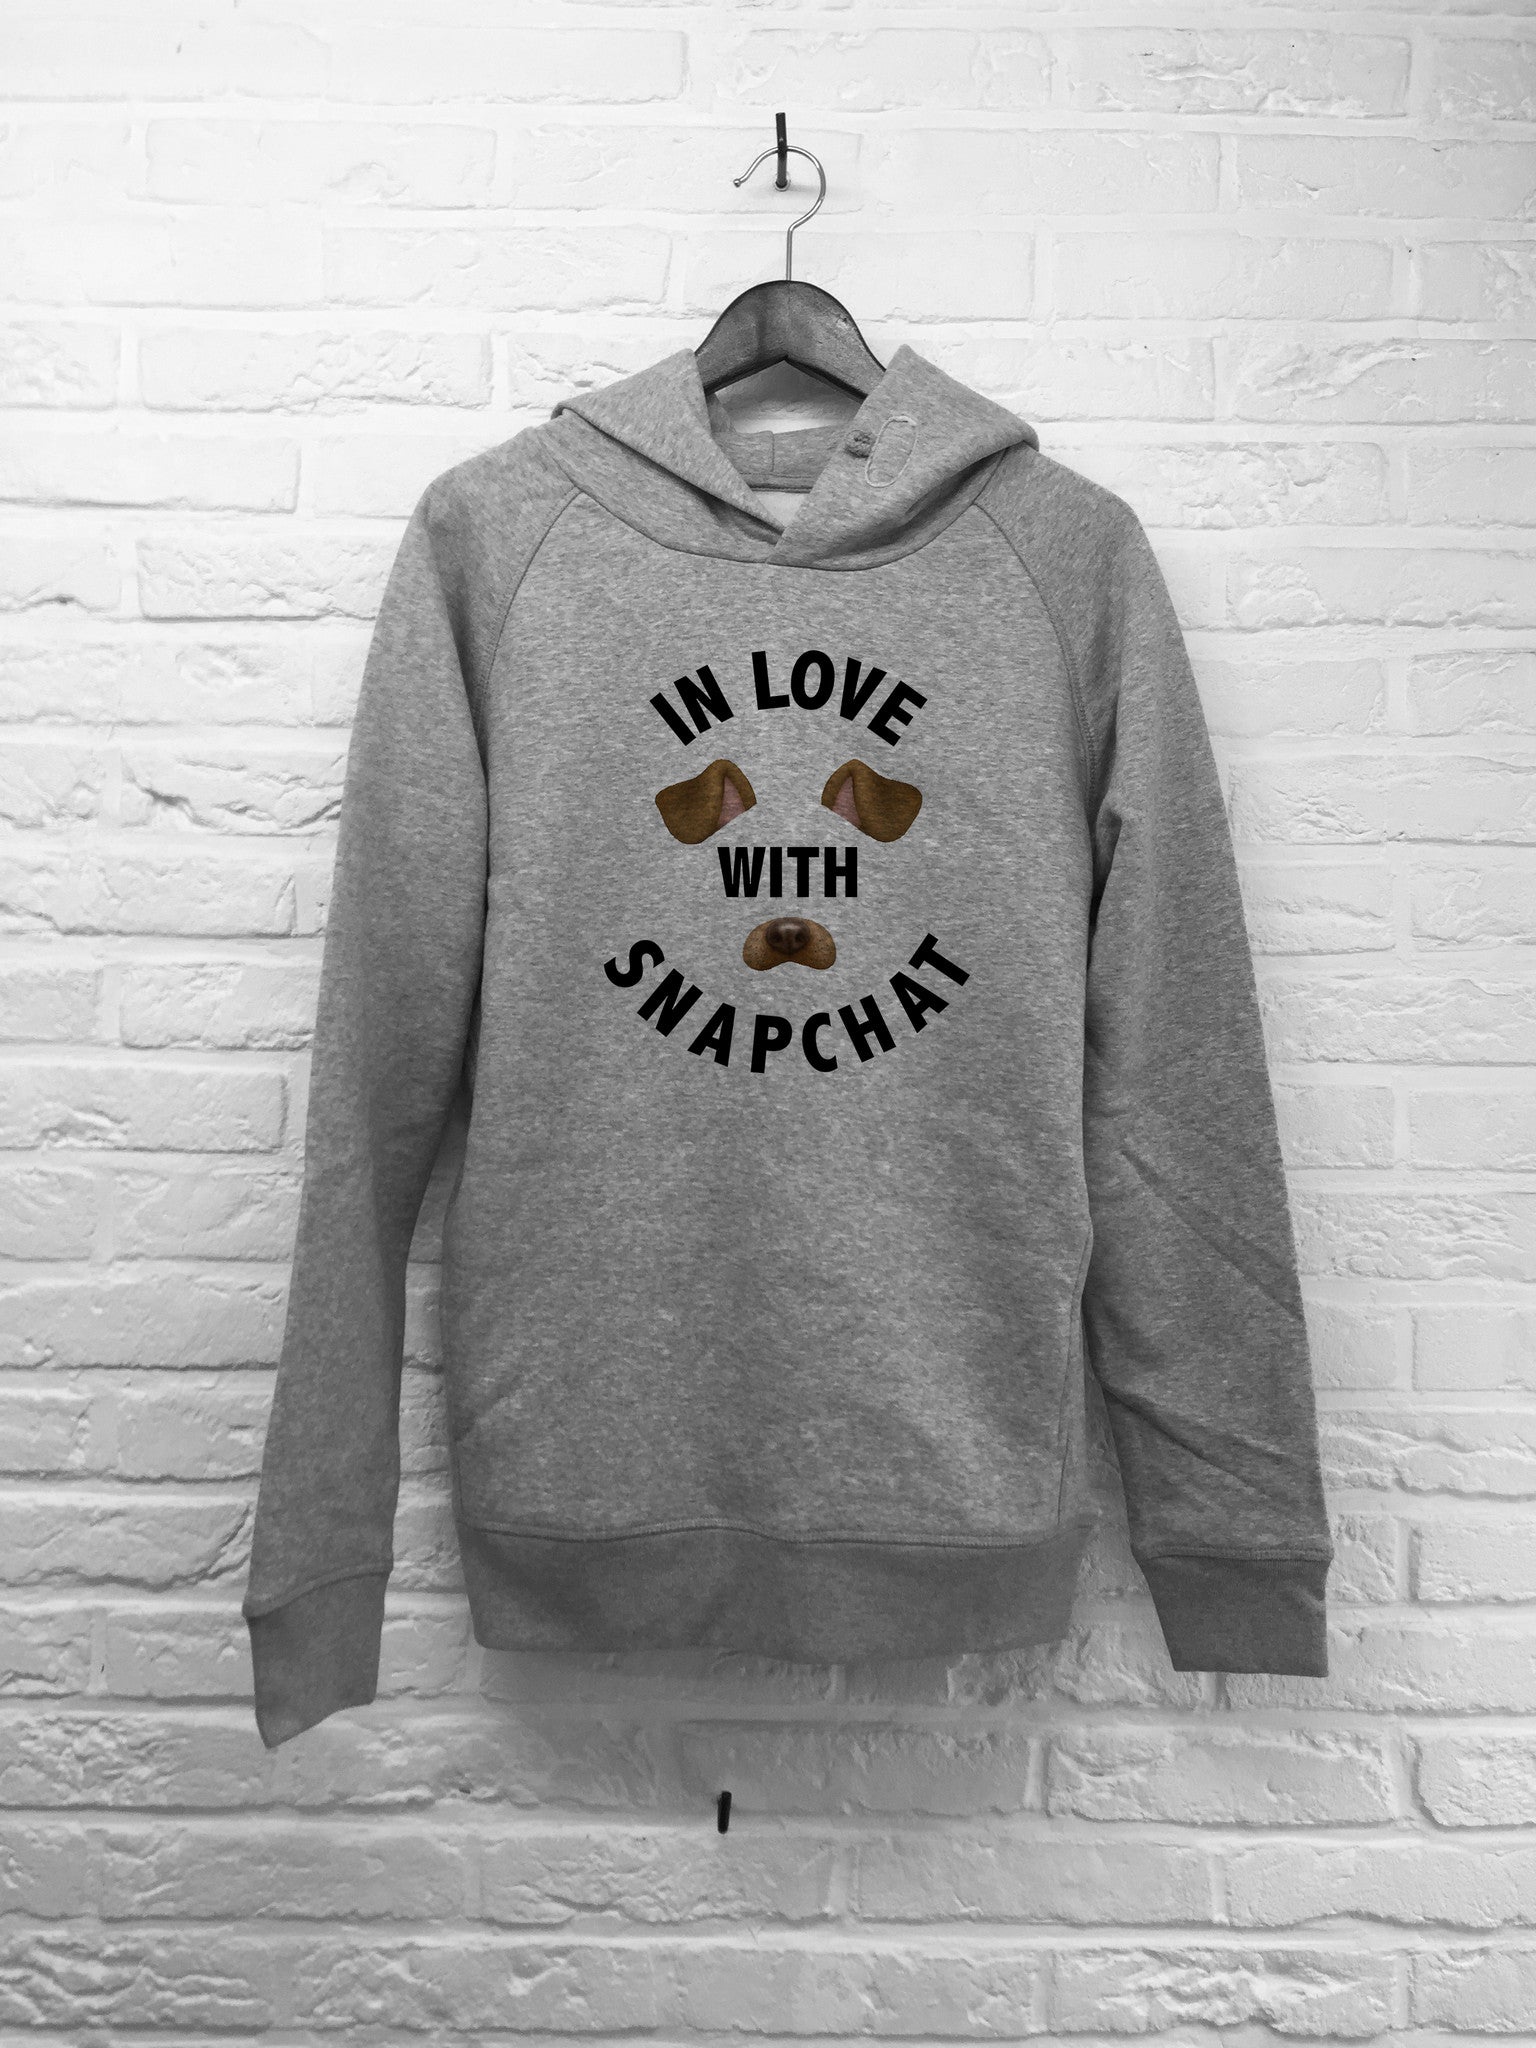 In love with Snapchat - Hoodies Deluxe-Sweat shirts-Atelier Amelot